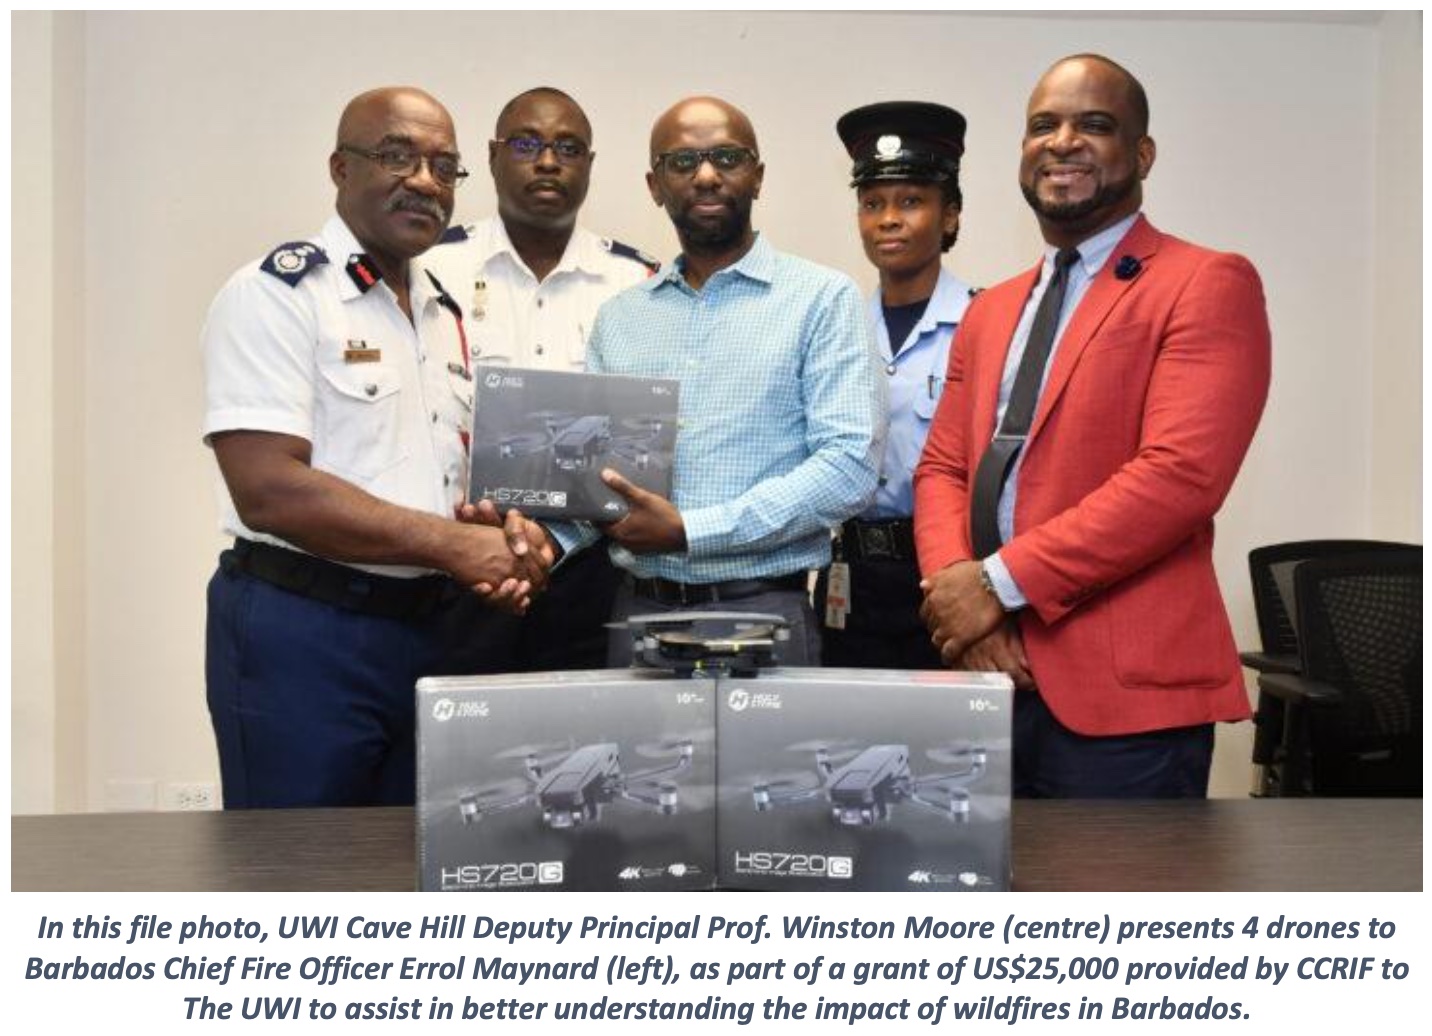  CCRIF Collaborates with UWI Cave Hill Campus to Provide the Barbados Fire Service and Ministry of Health with Equipment to Reduce the Impacts of Wildfires  on People and Communities